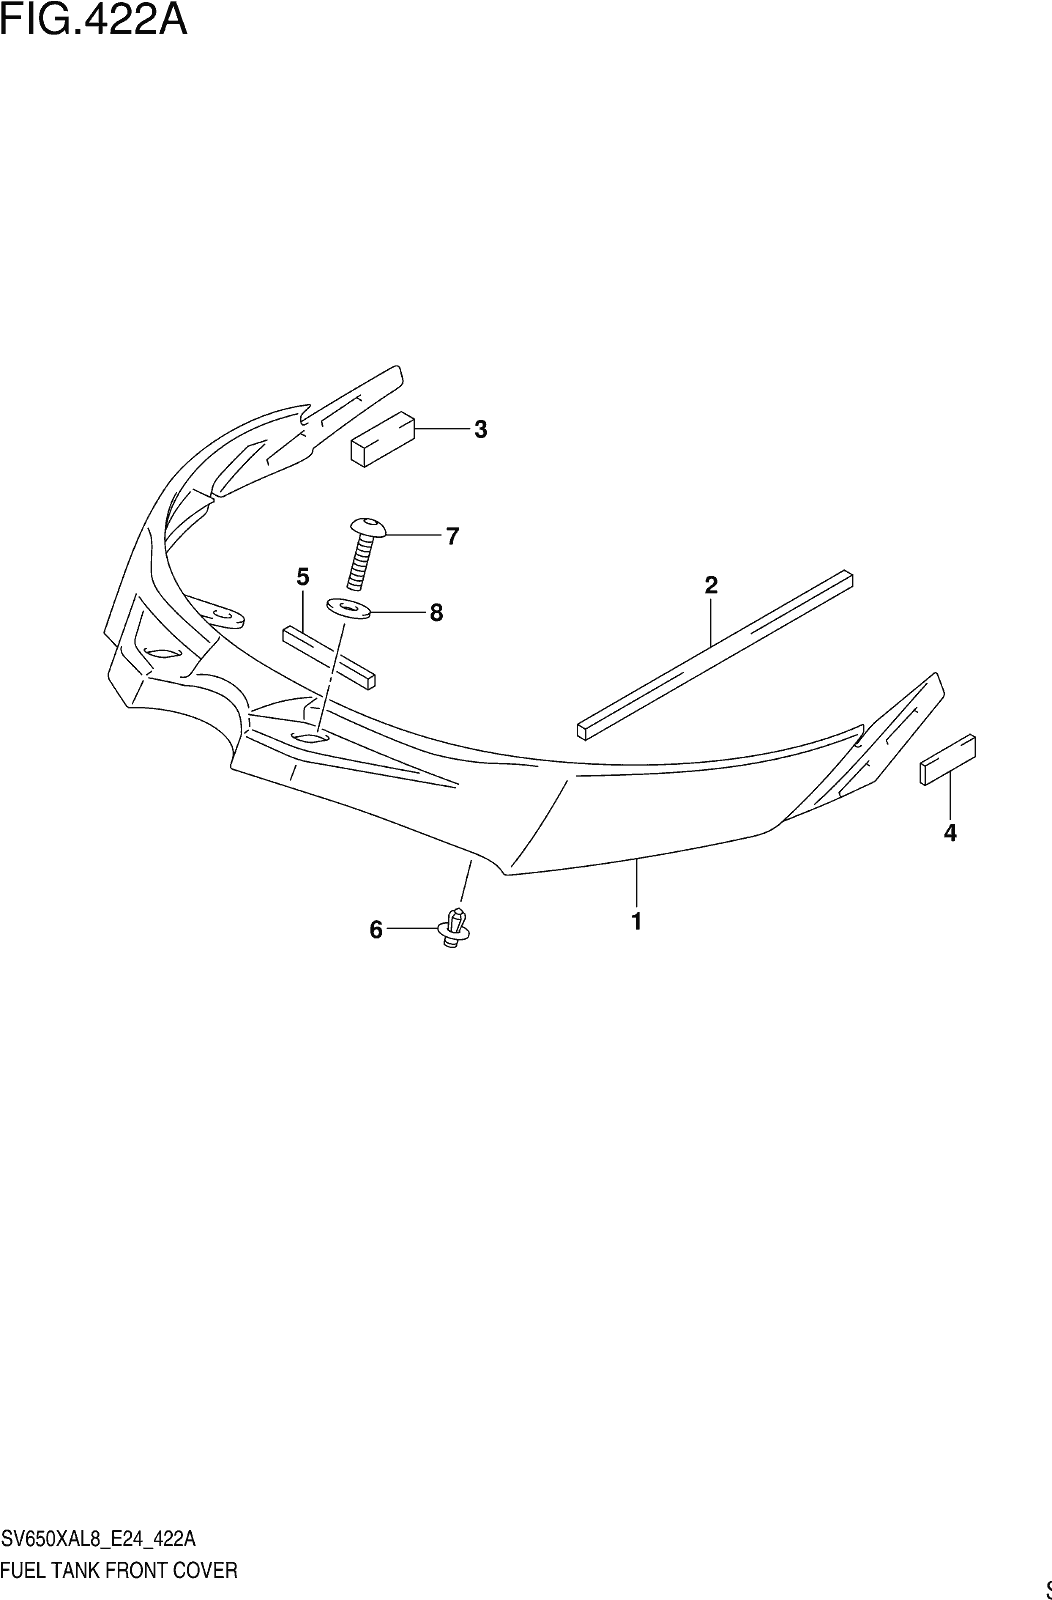 Fig.422a Fuel Tank Front Cover